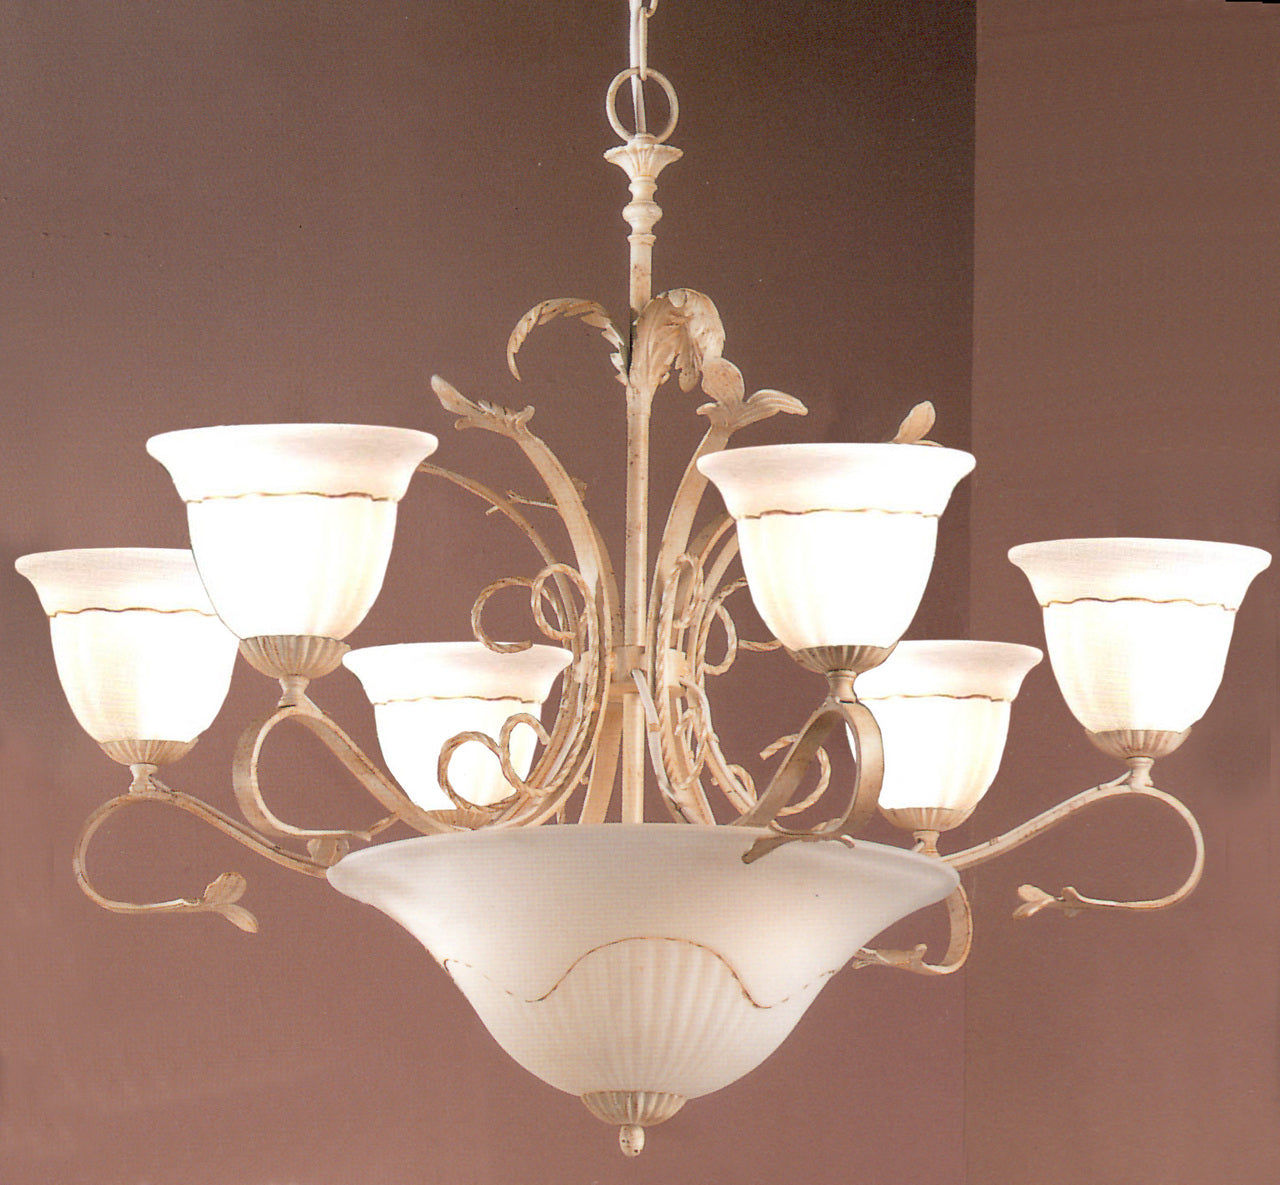 Classic Lighting 4119 I Treviso Wrought Iron Chandelier in Ivory (Imported from Italy)